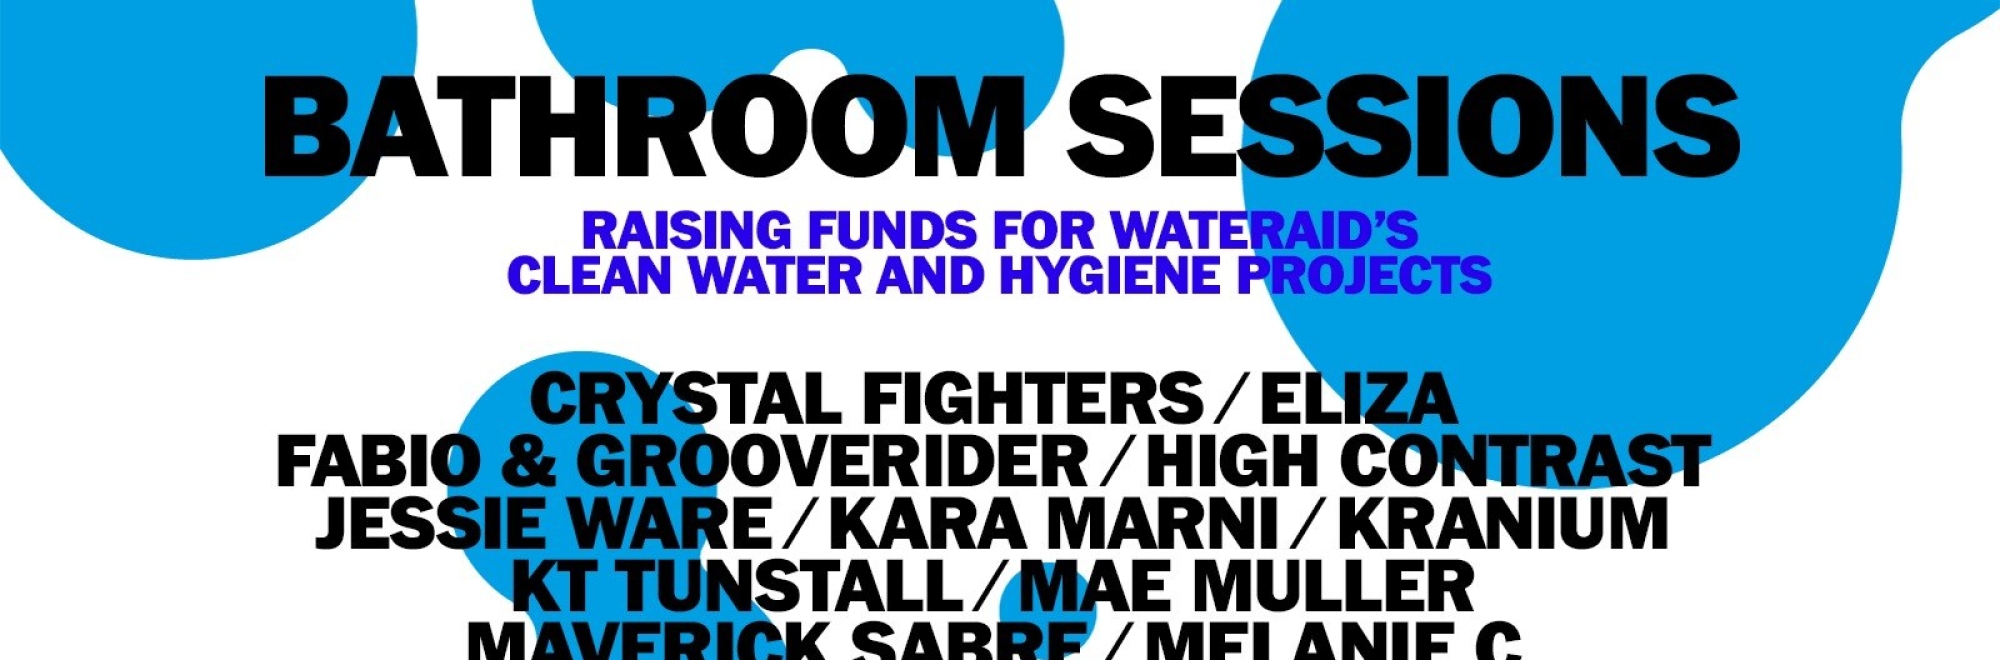 KRPT° creates digitally disruptive campaign to raise money for WaterAid's COVID-19 appeal